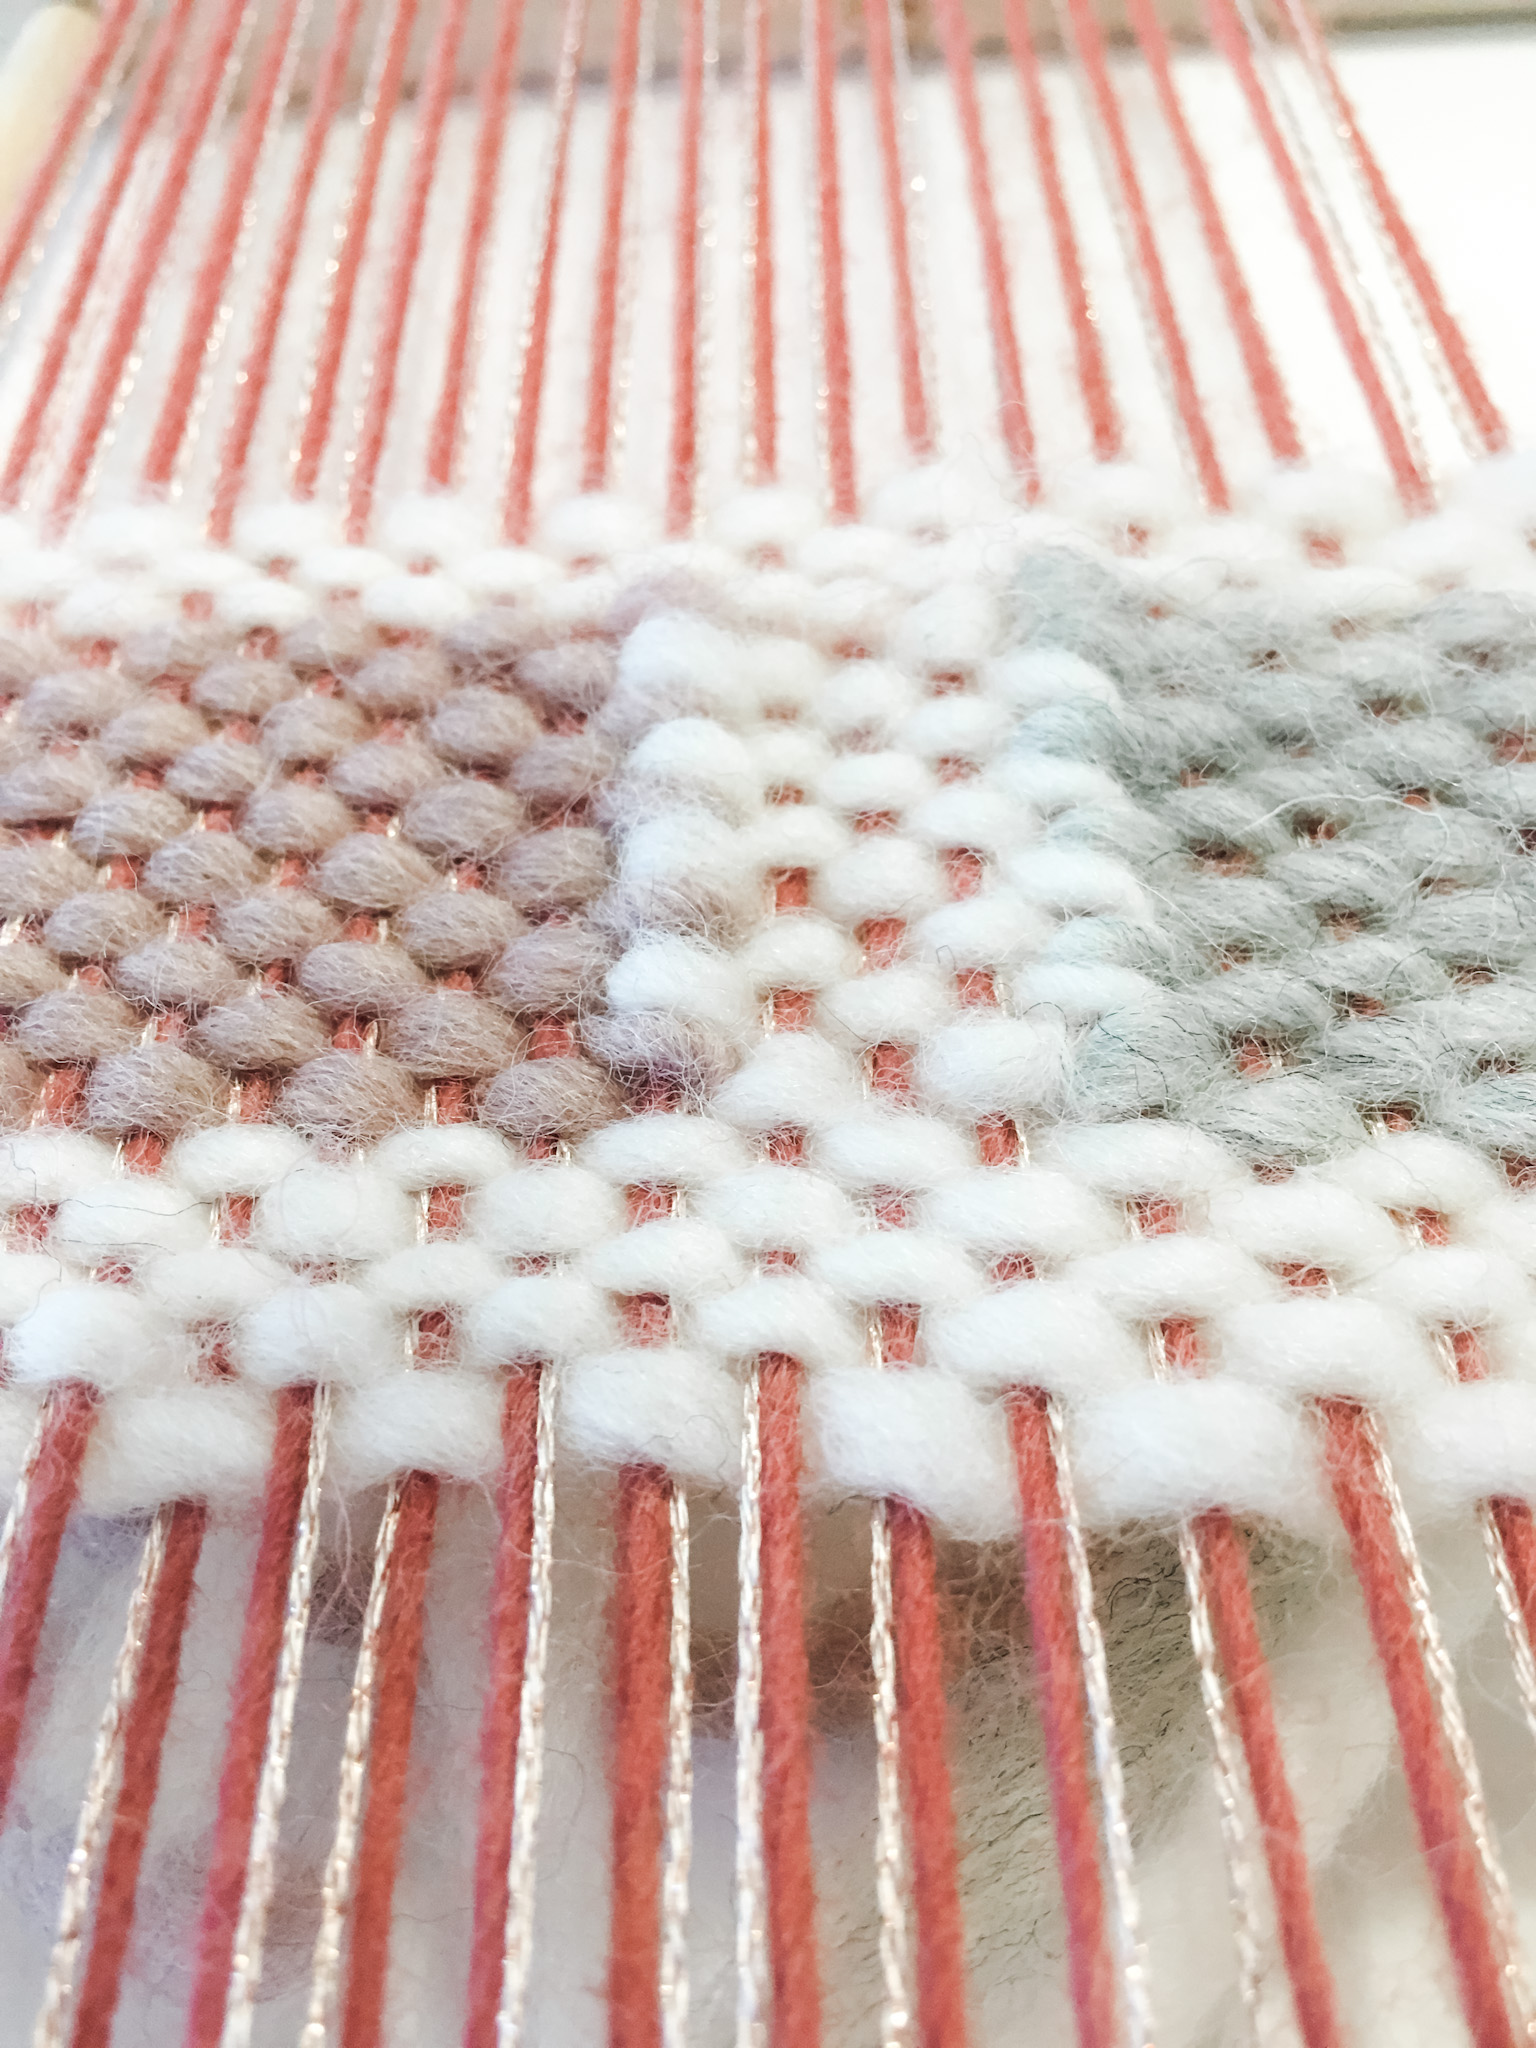 Weaving squares on the loom.